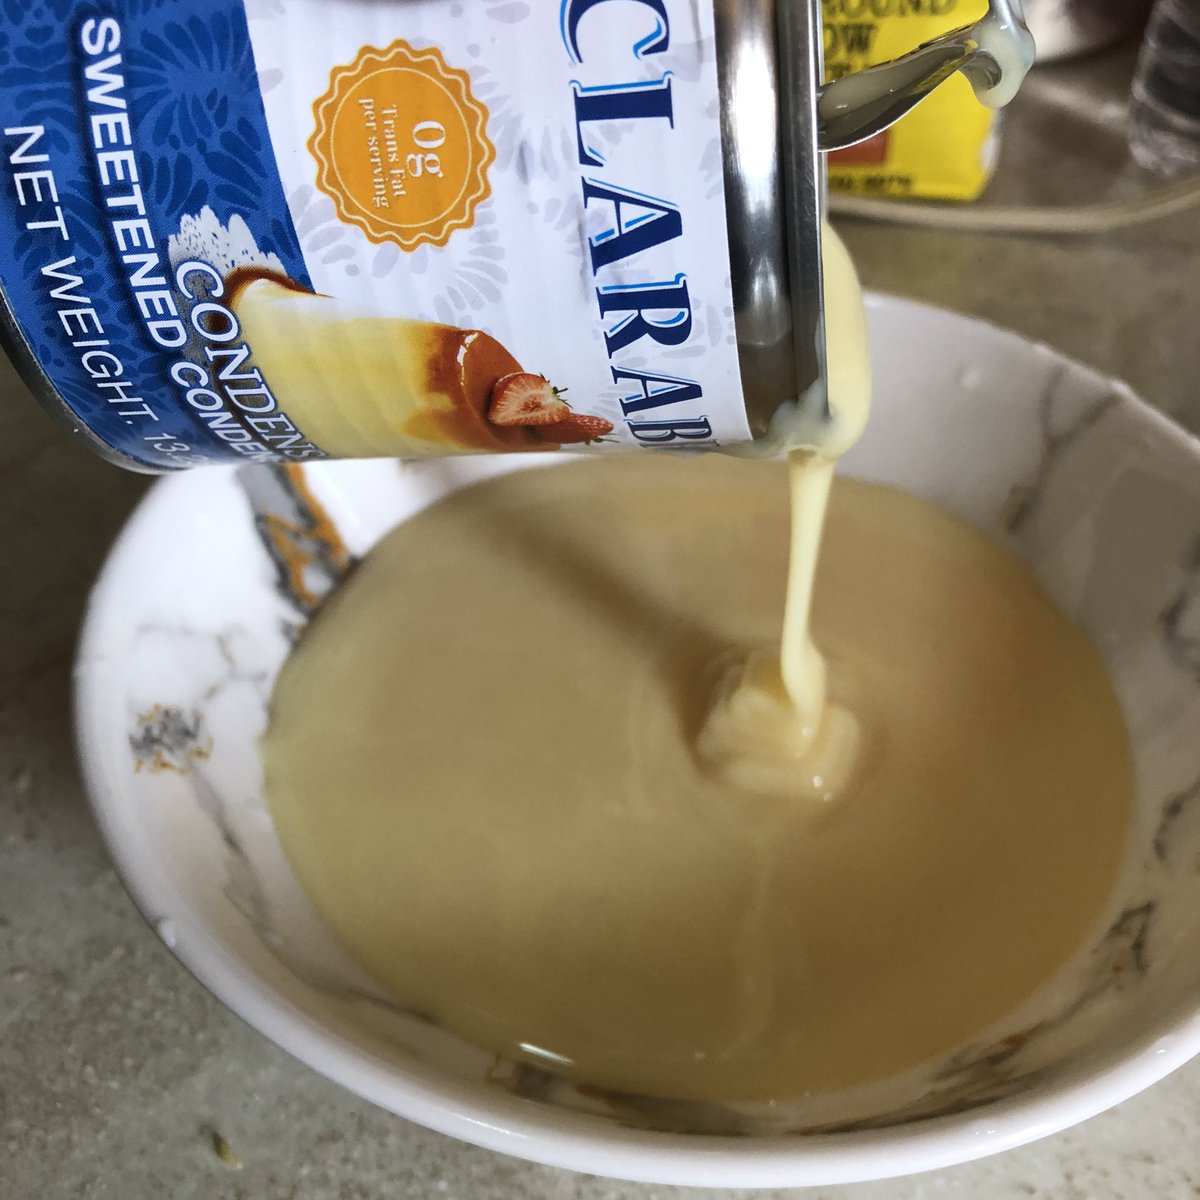 Because we are doing a no machine ice cream I will be whipping cream. To give it more flavor I am mixing sweetened condensed milk, vanilla extract and cinnamon